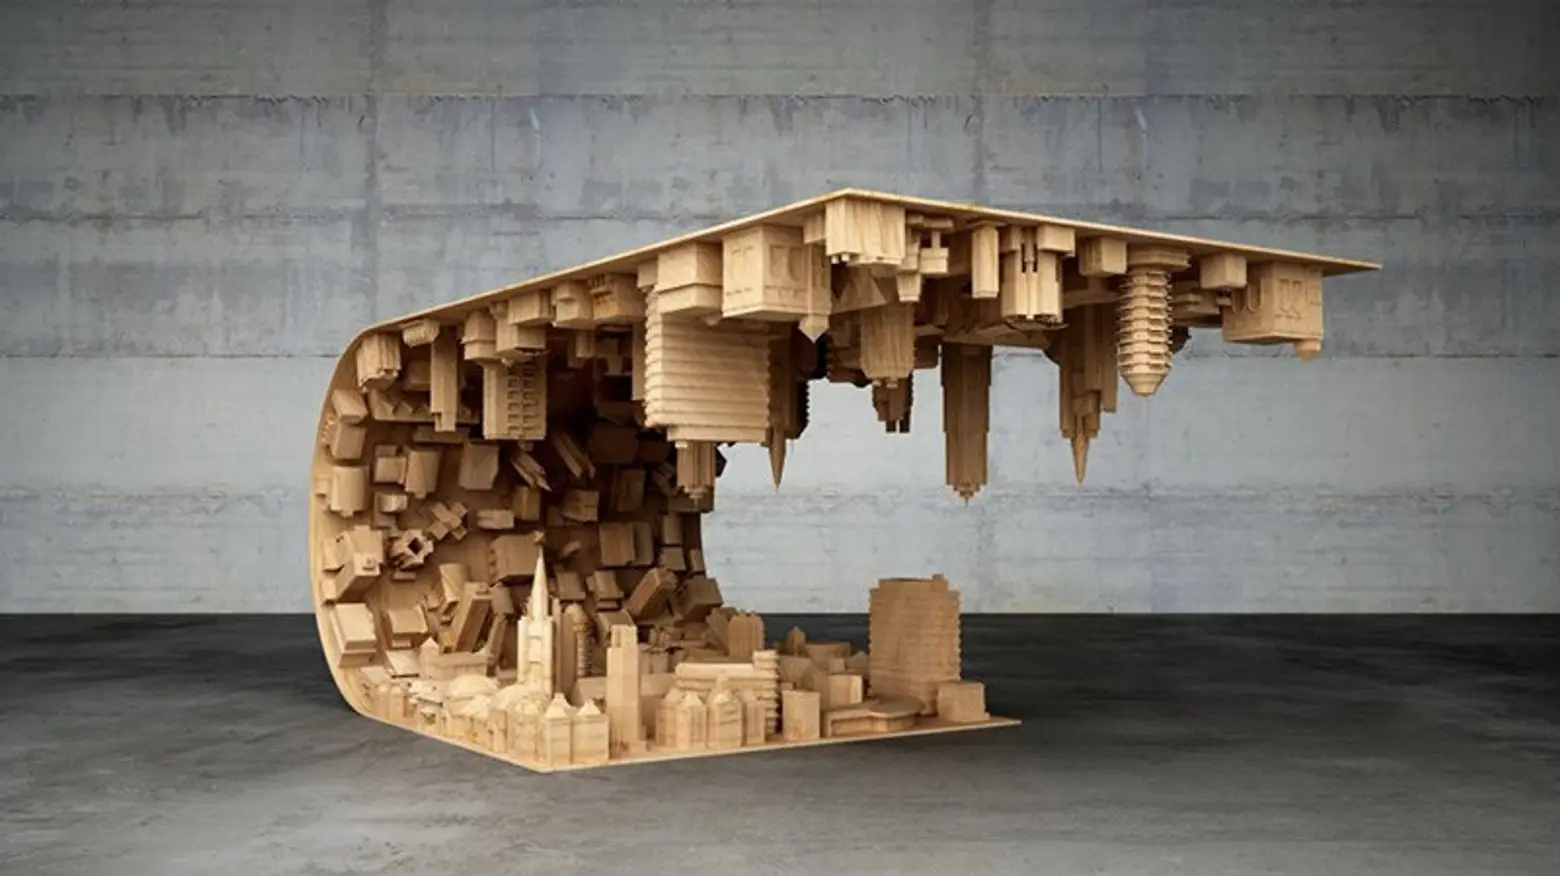 ‘Inception’-Inspired Coffee Table Takes the Horizonless City to New Dimensions